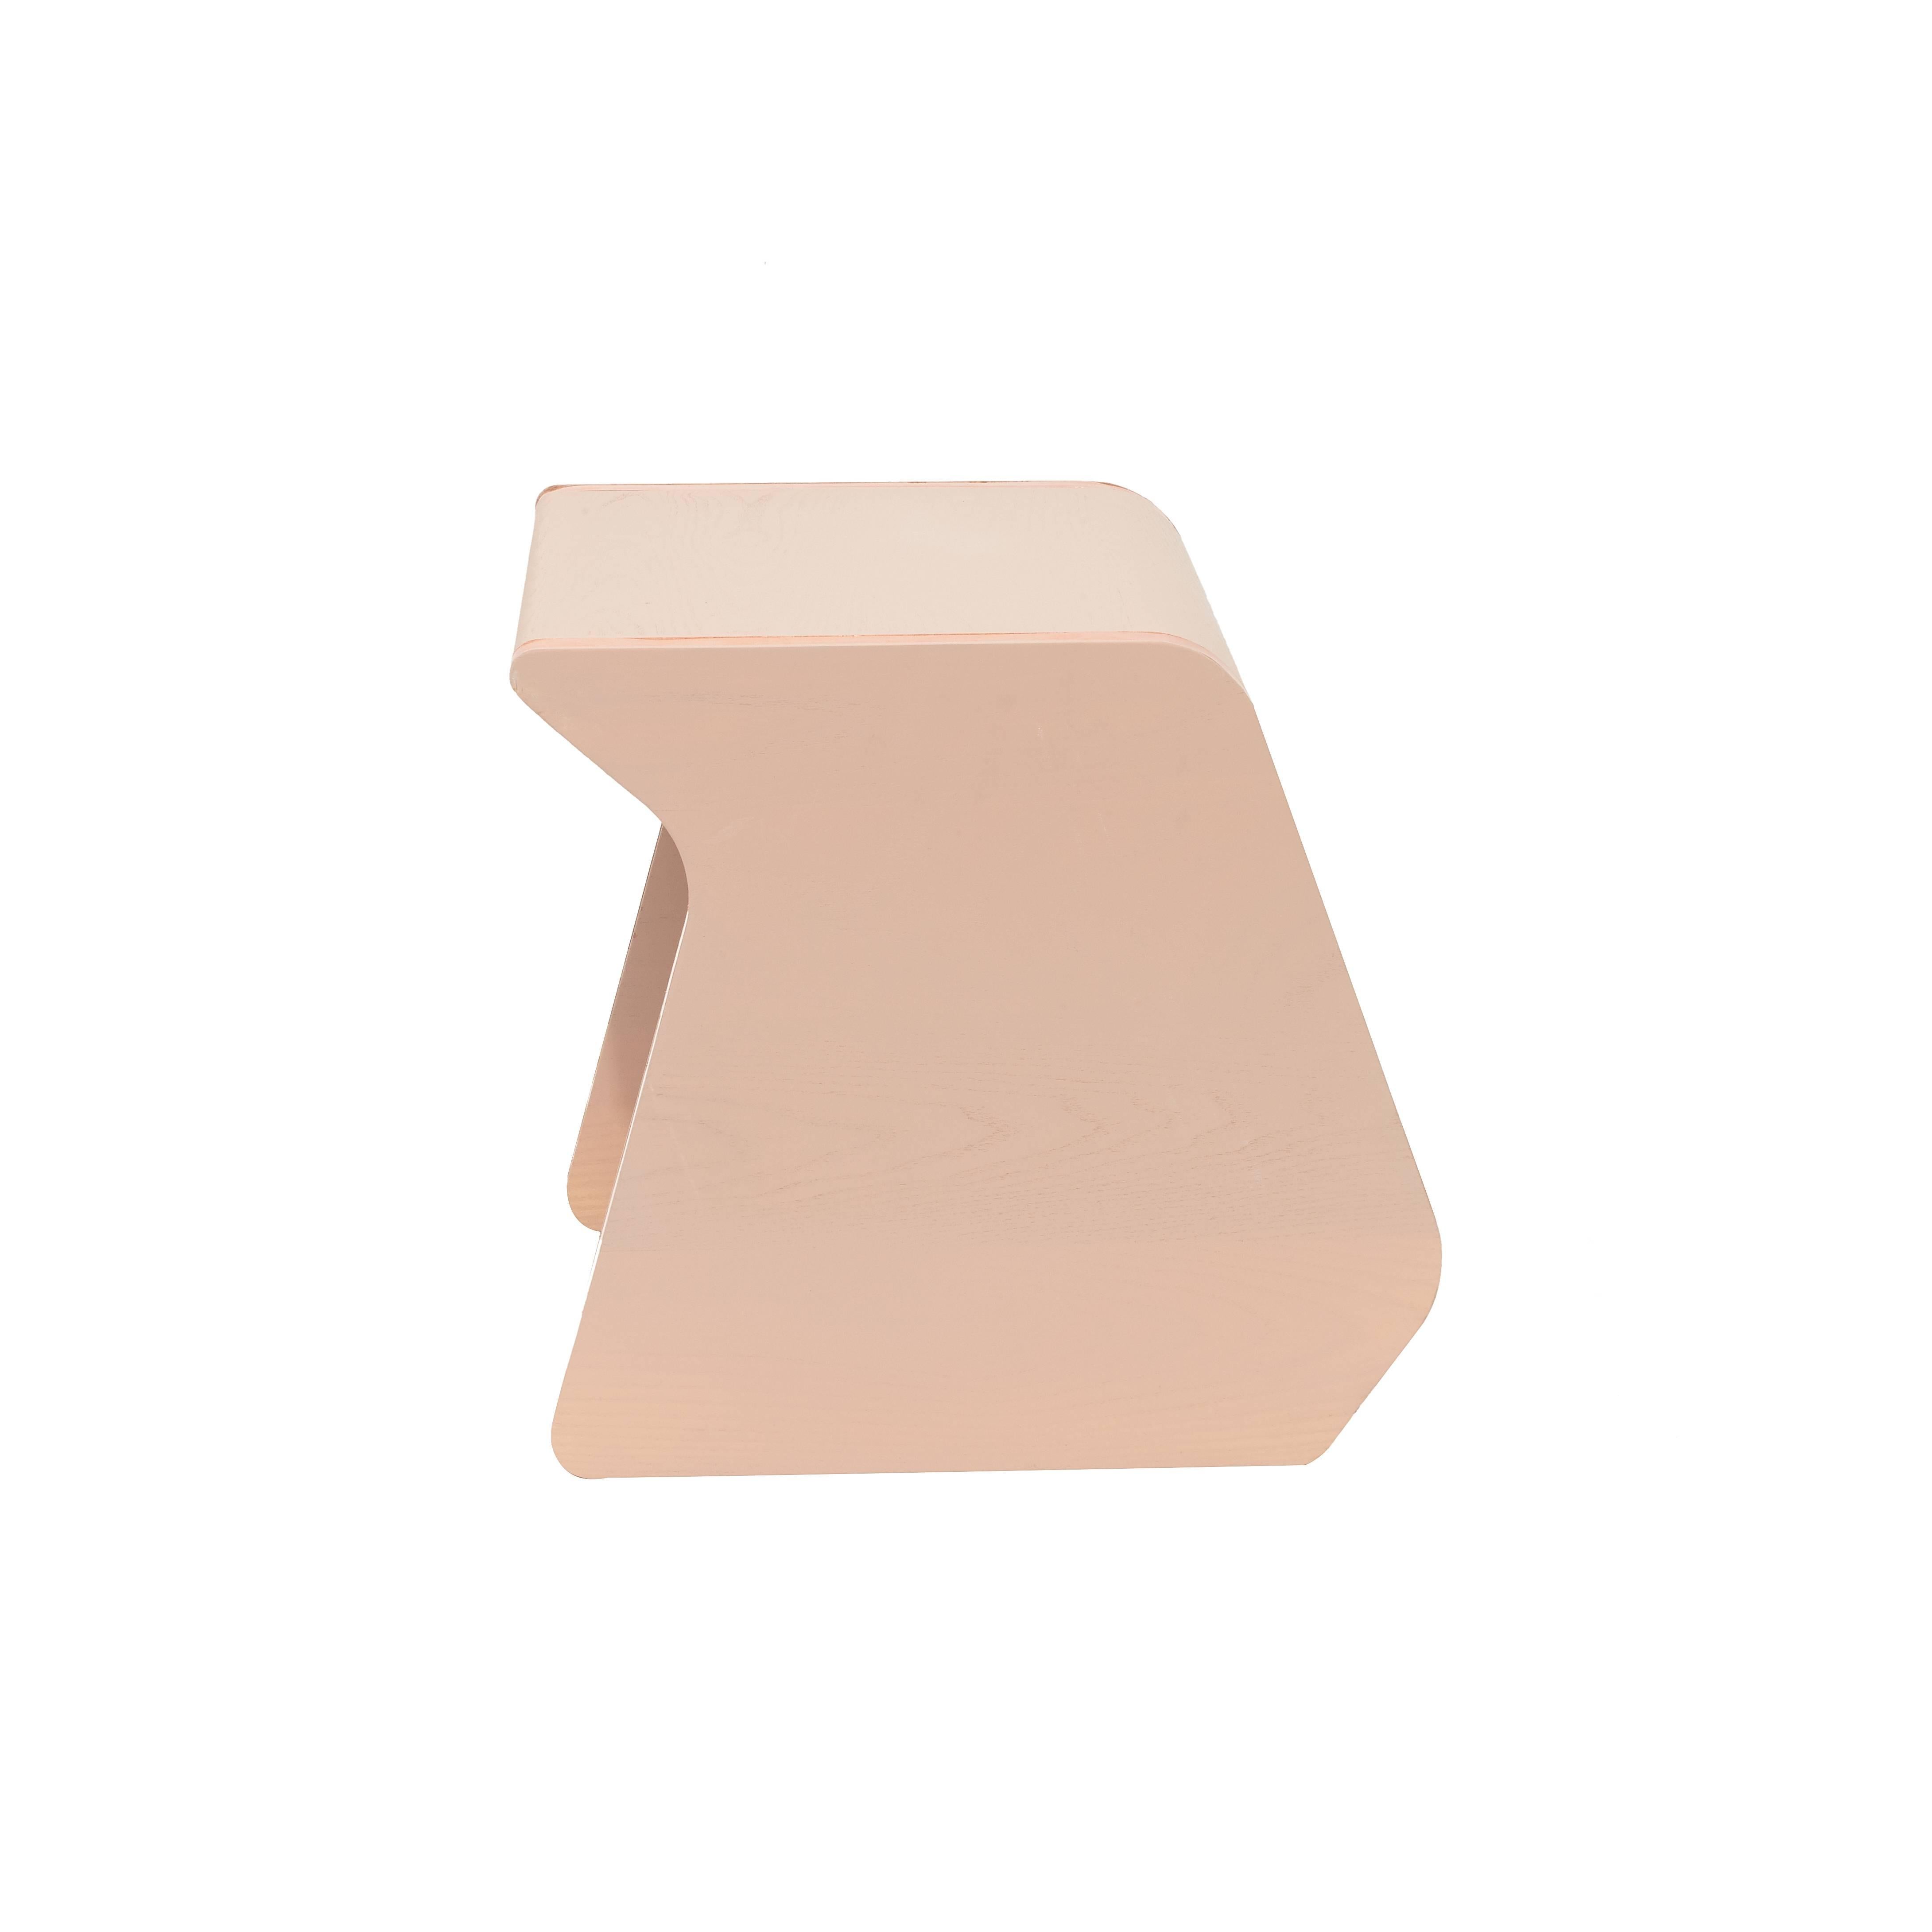 Heritage 'Perch' child chair by studiokinder in blush pigmented ash with copper

studiokinder
Contemporary, USA, 2017
Pigmented ash with copper
Color: Blush (Pink)
Measures: H 15